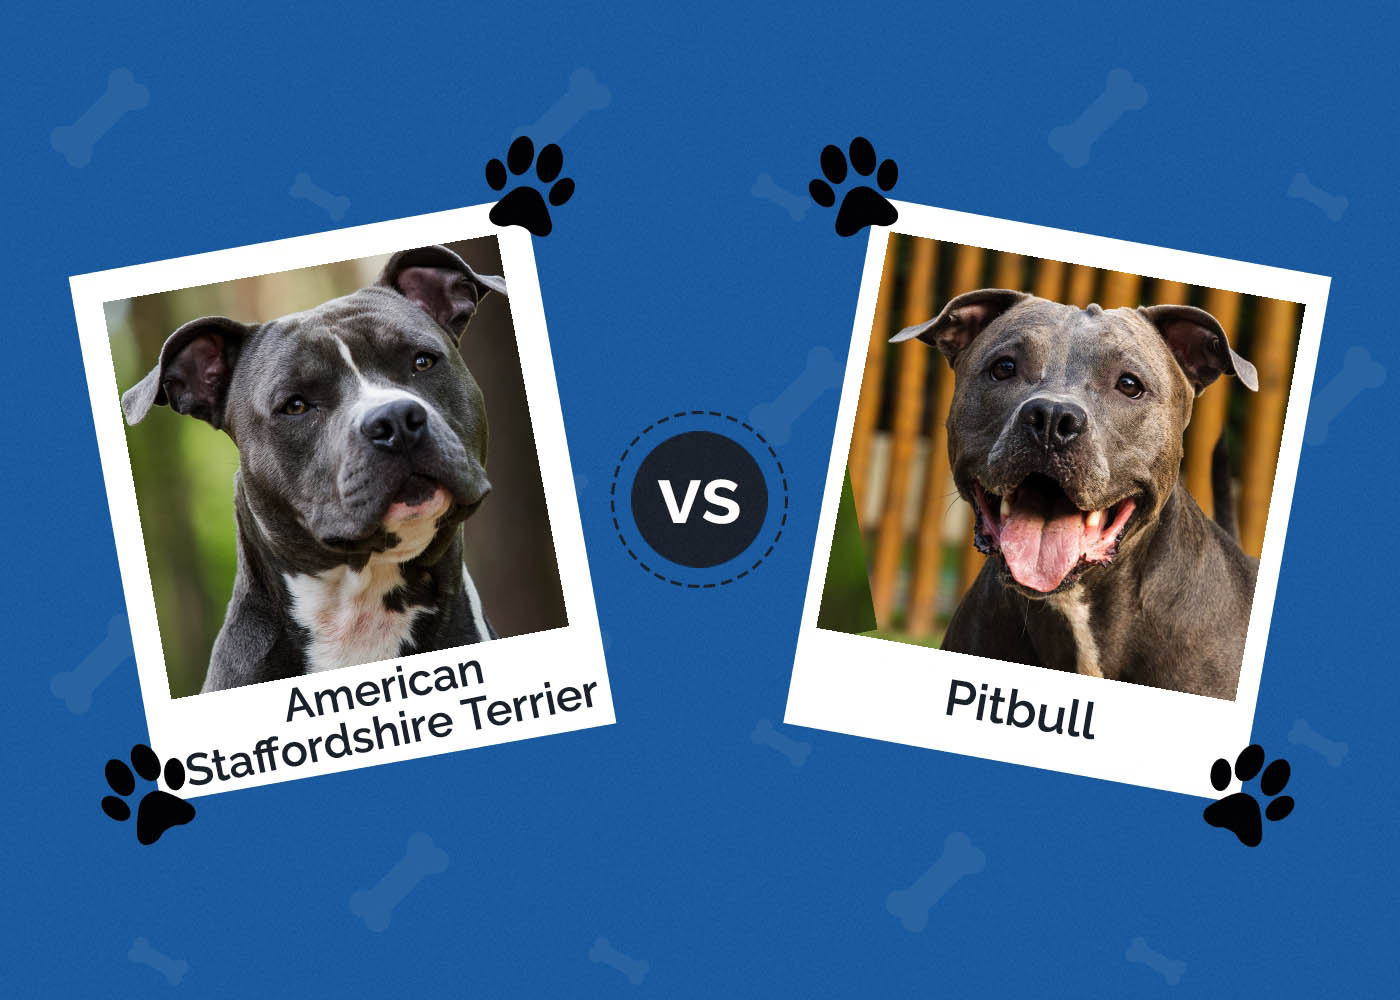 American Staffordshire Terrier vs. Pitbull: What Are The Differences?